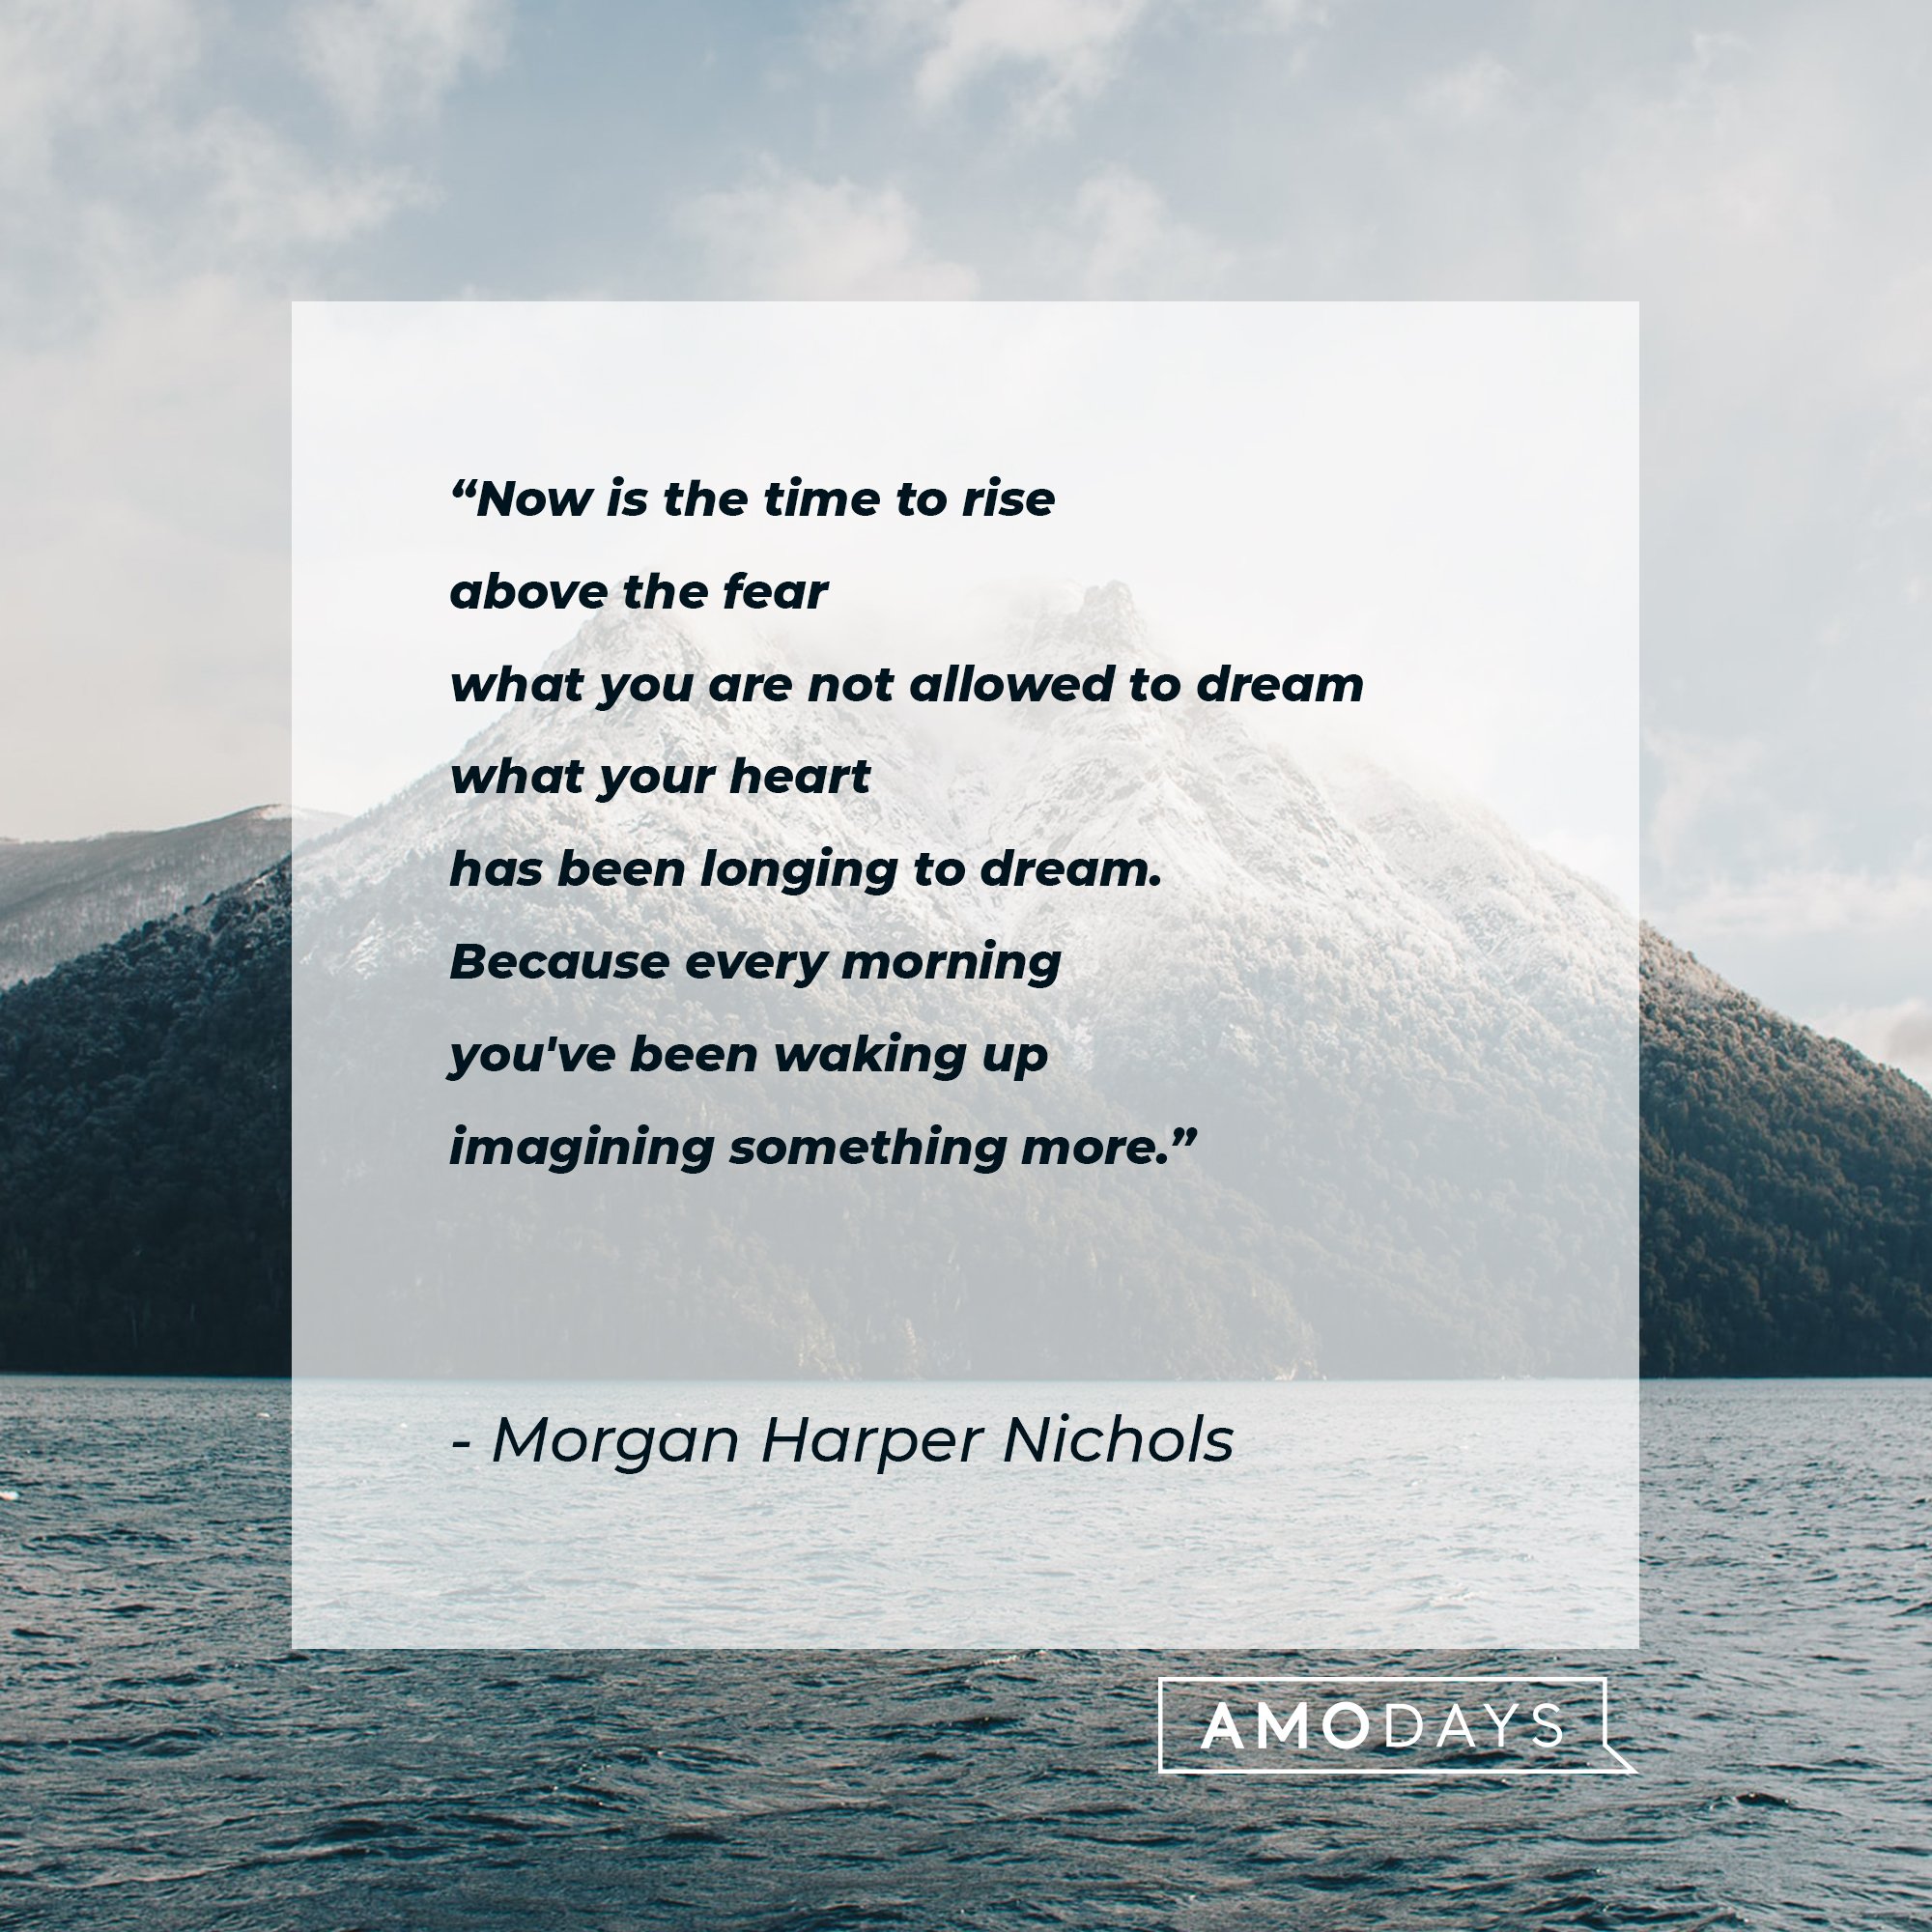 Morgan Harper Nichols’ quote: "Now is the time to rise above the fear/ what you are not allowed to dream/ what your heart/ has been longing to dream./ Because every morning, /you've been waking up/imagining something more." | Image: AmoDays